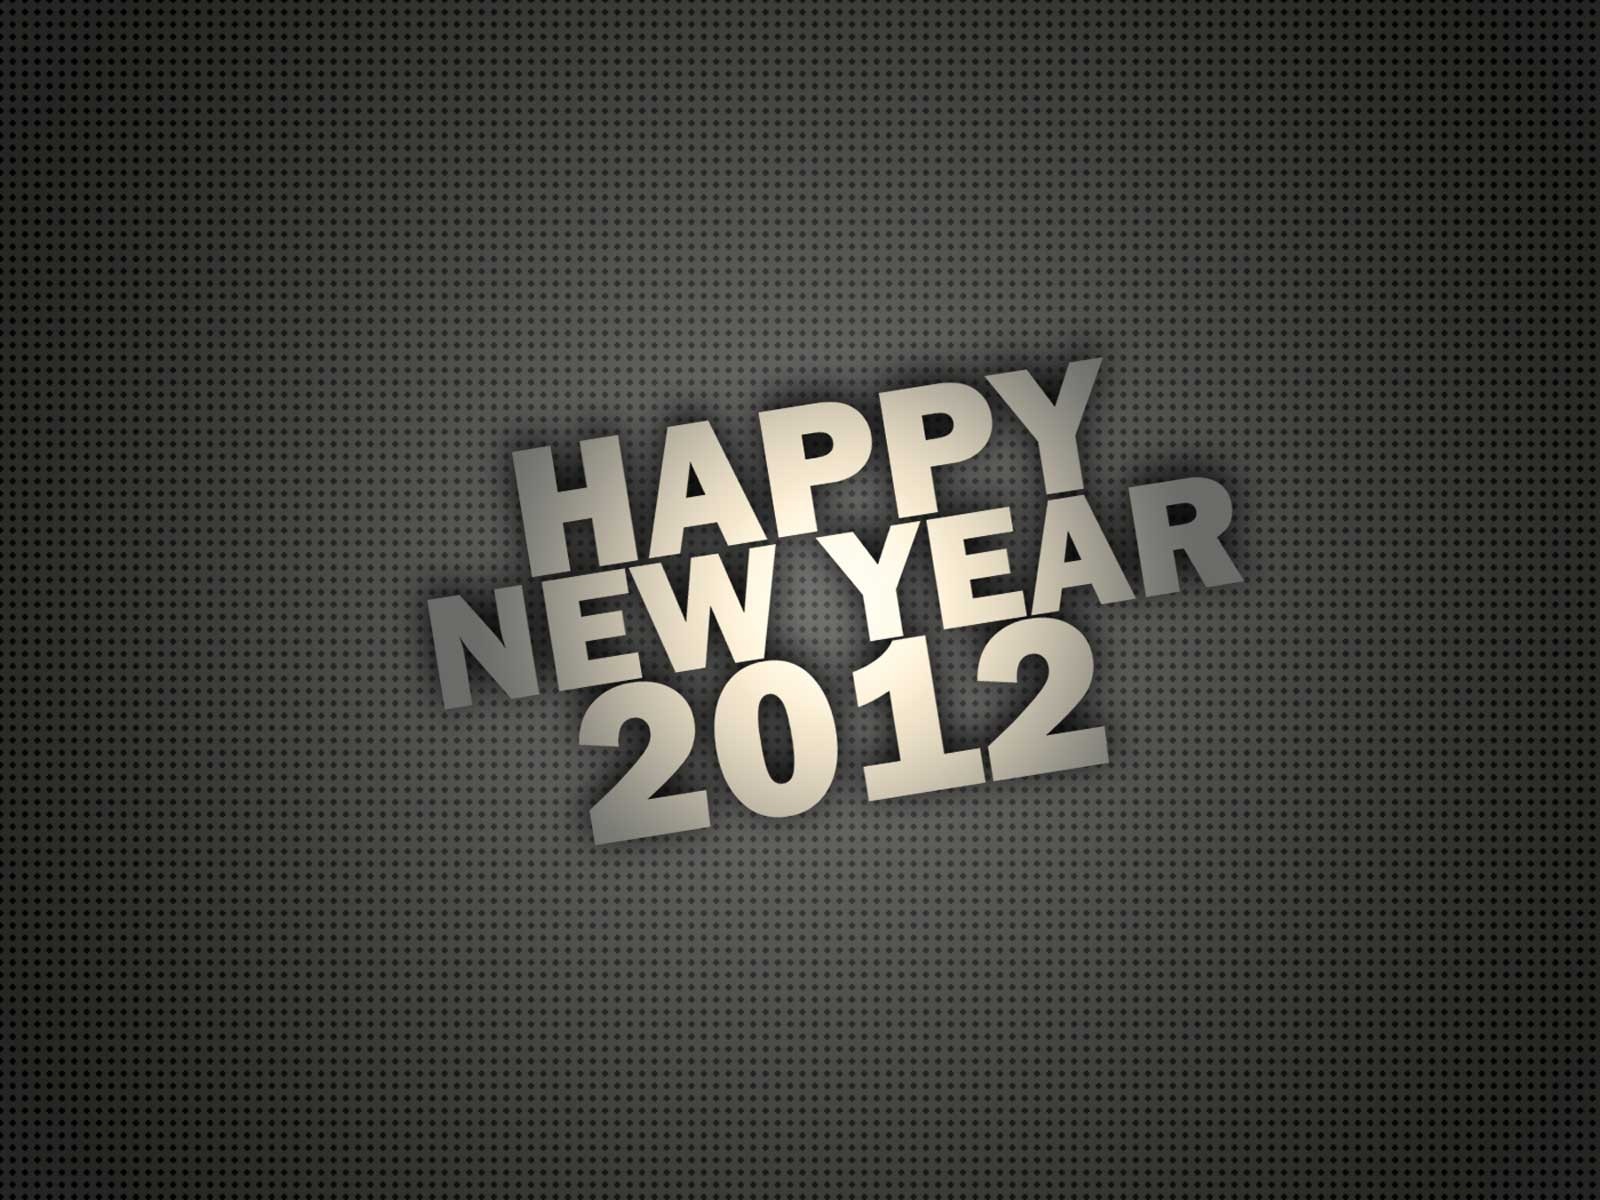 2012 New Year wallpapers (2) #4 - 1600x1200